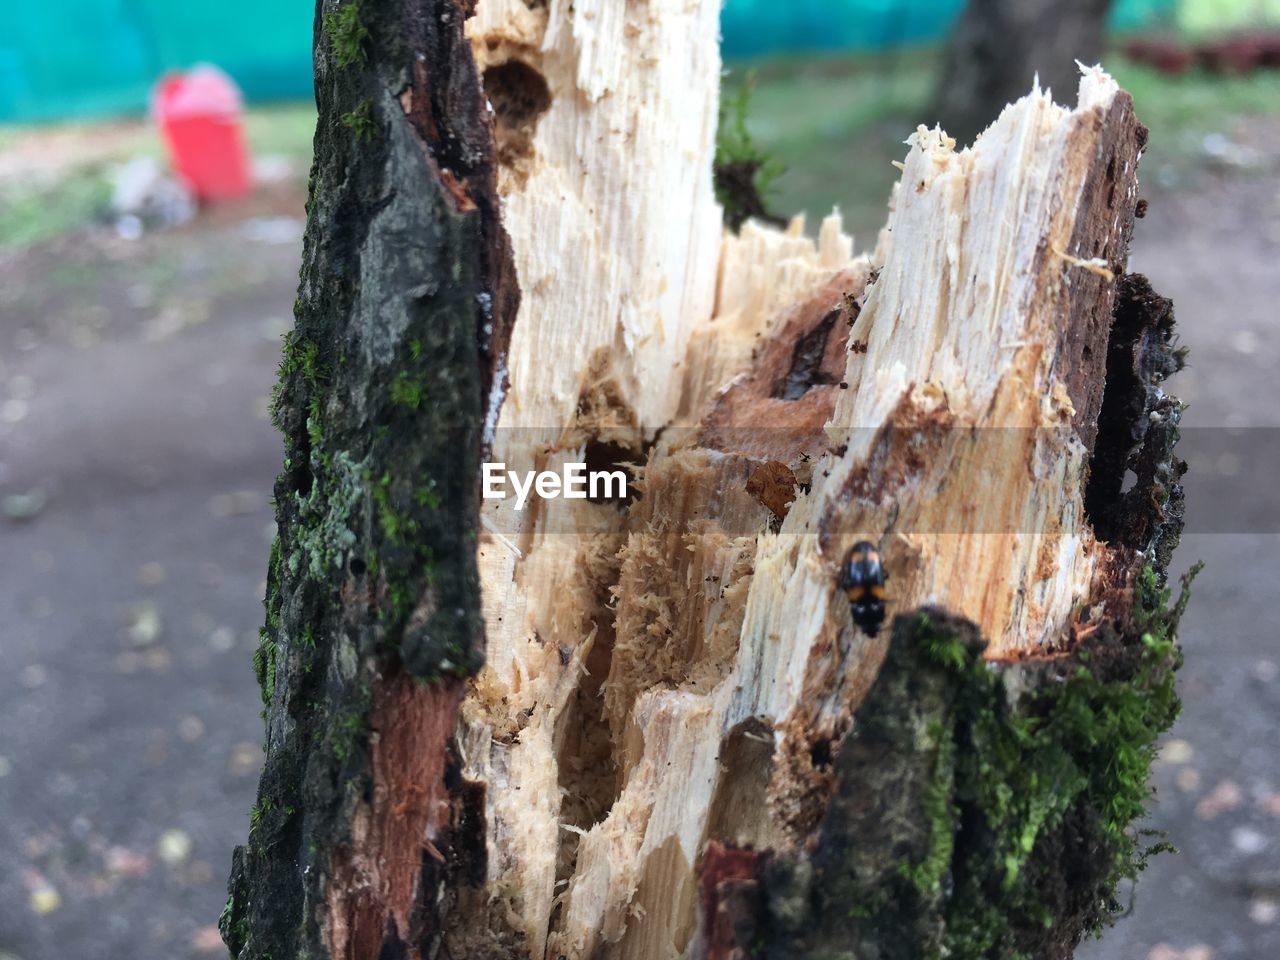 CLOSE-UP OF TREE TRUNK AGAINST BLURRED BACKGROUND